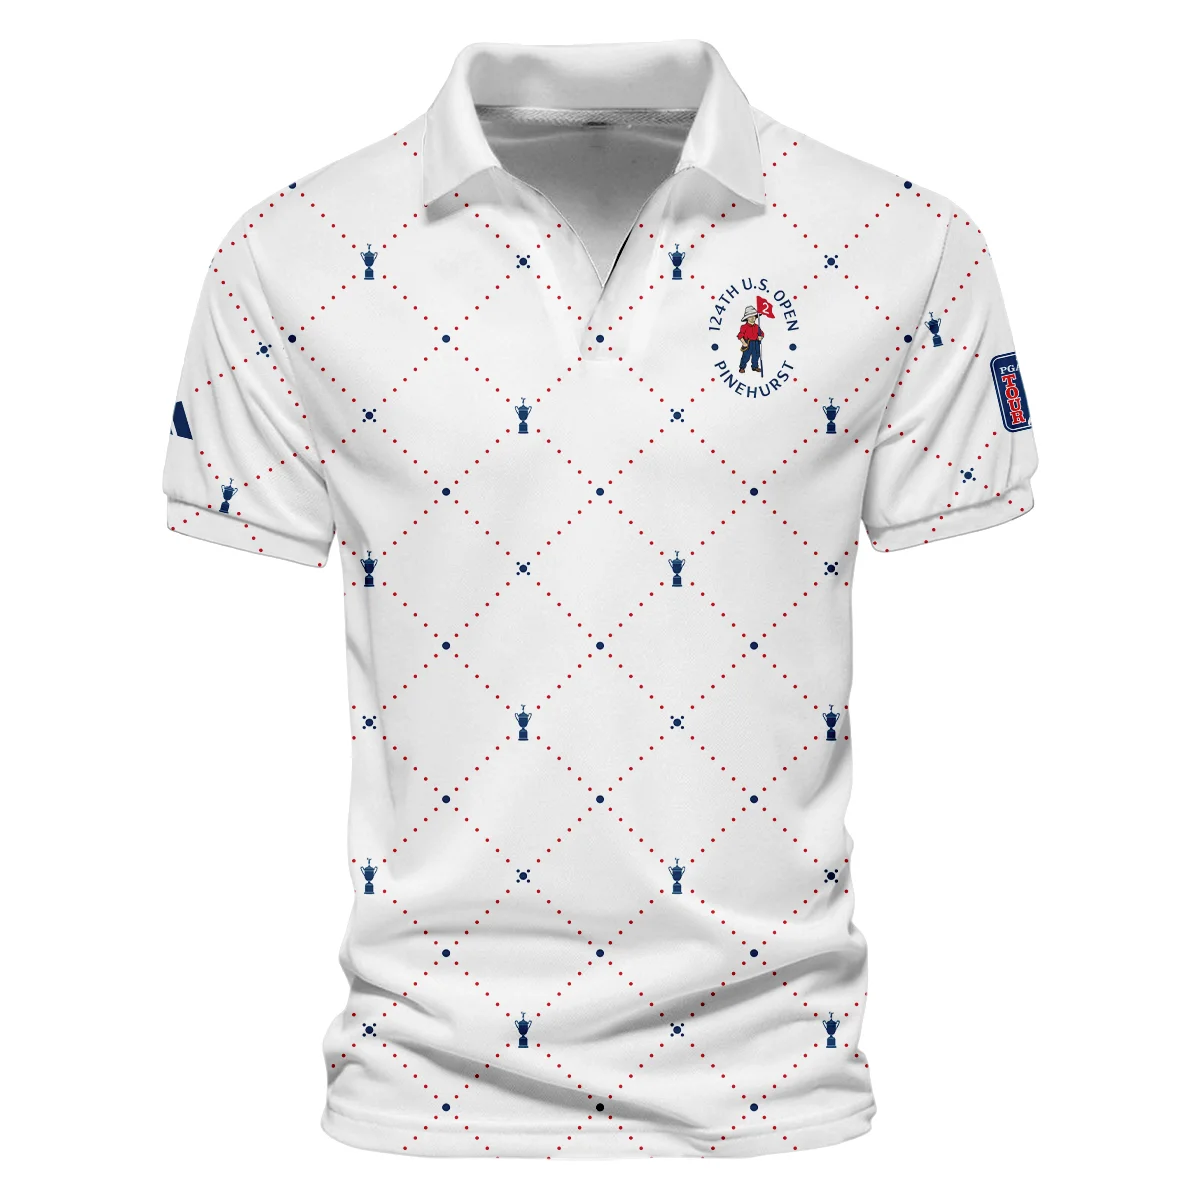 Argyle Pattern With Cup 124th U.S. Open Pinehurst Adidas Vneck Long Polo Shirt Style Classic Long Polo Shirt For Men